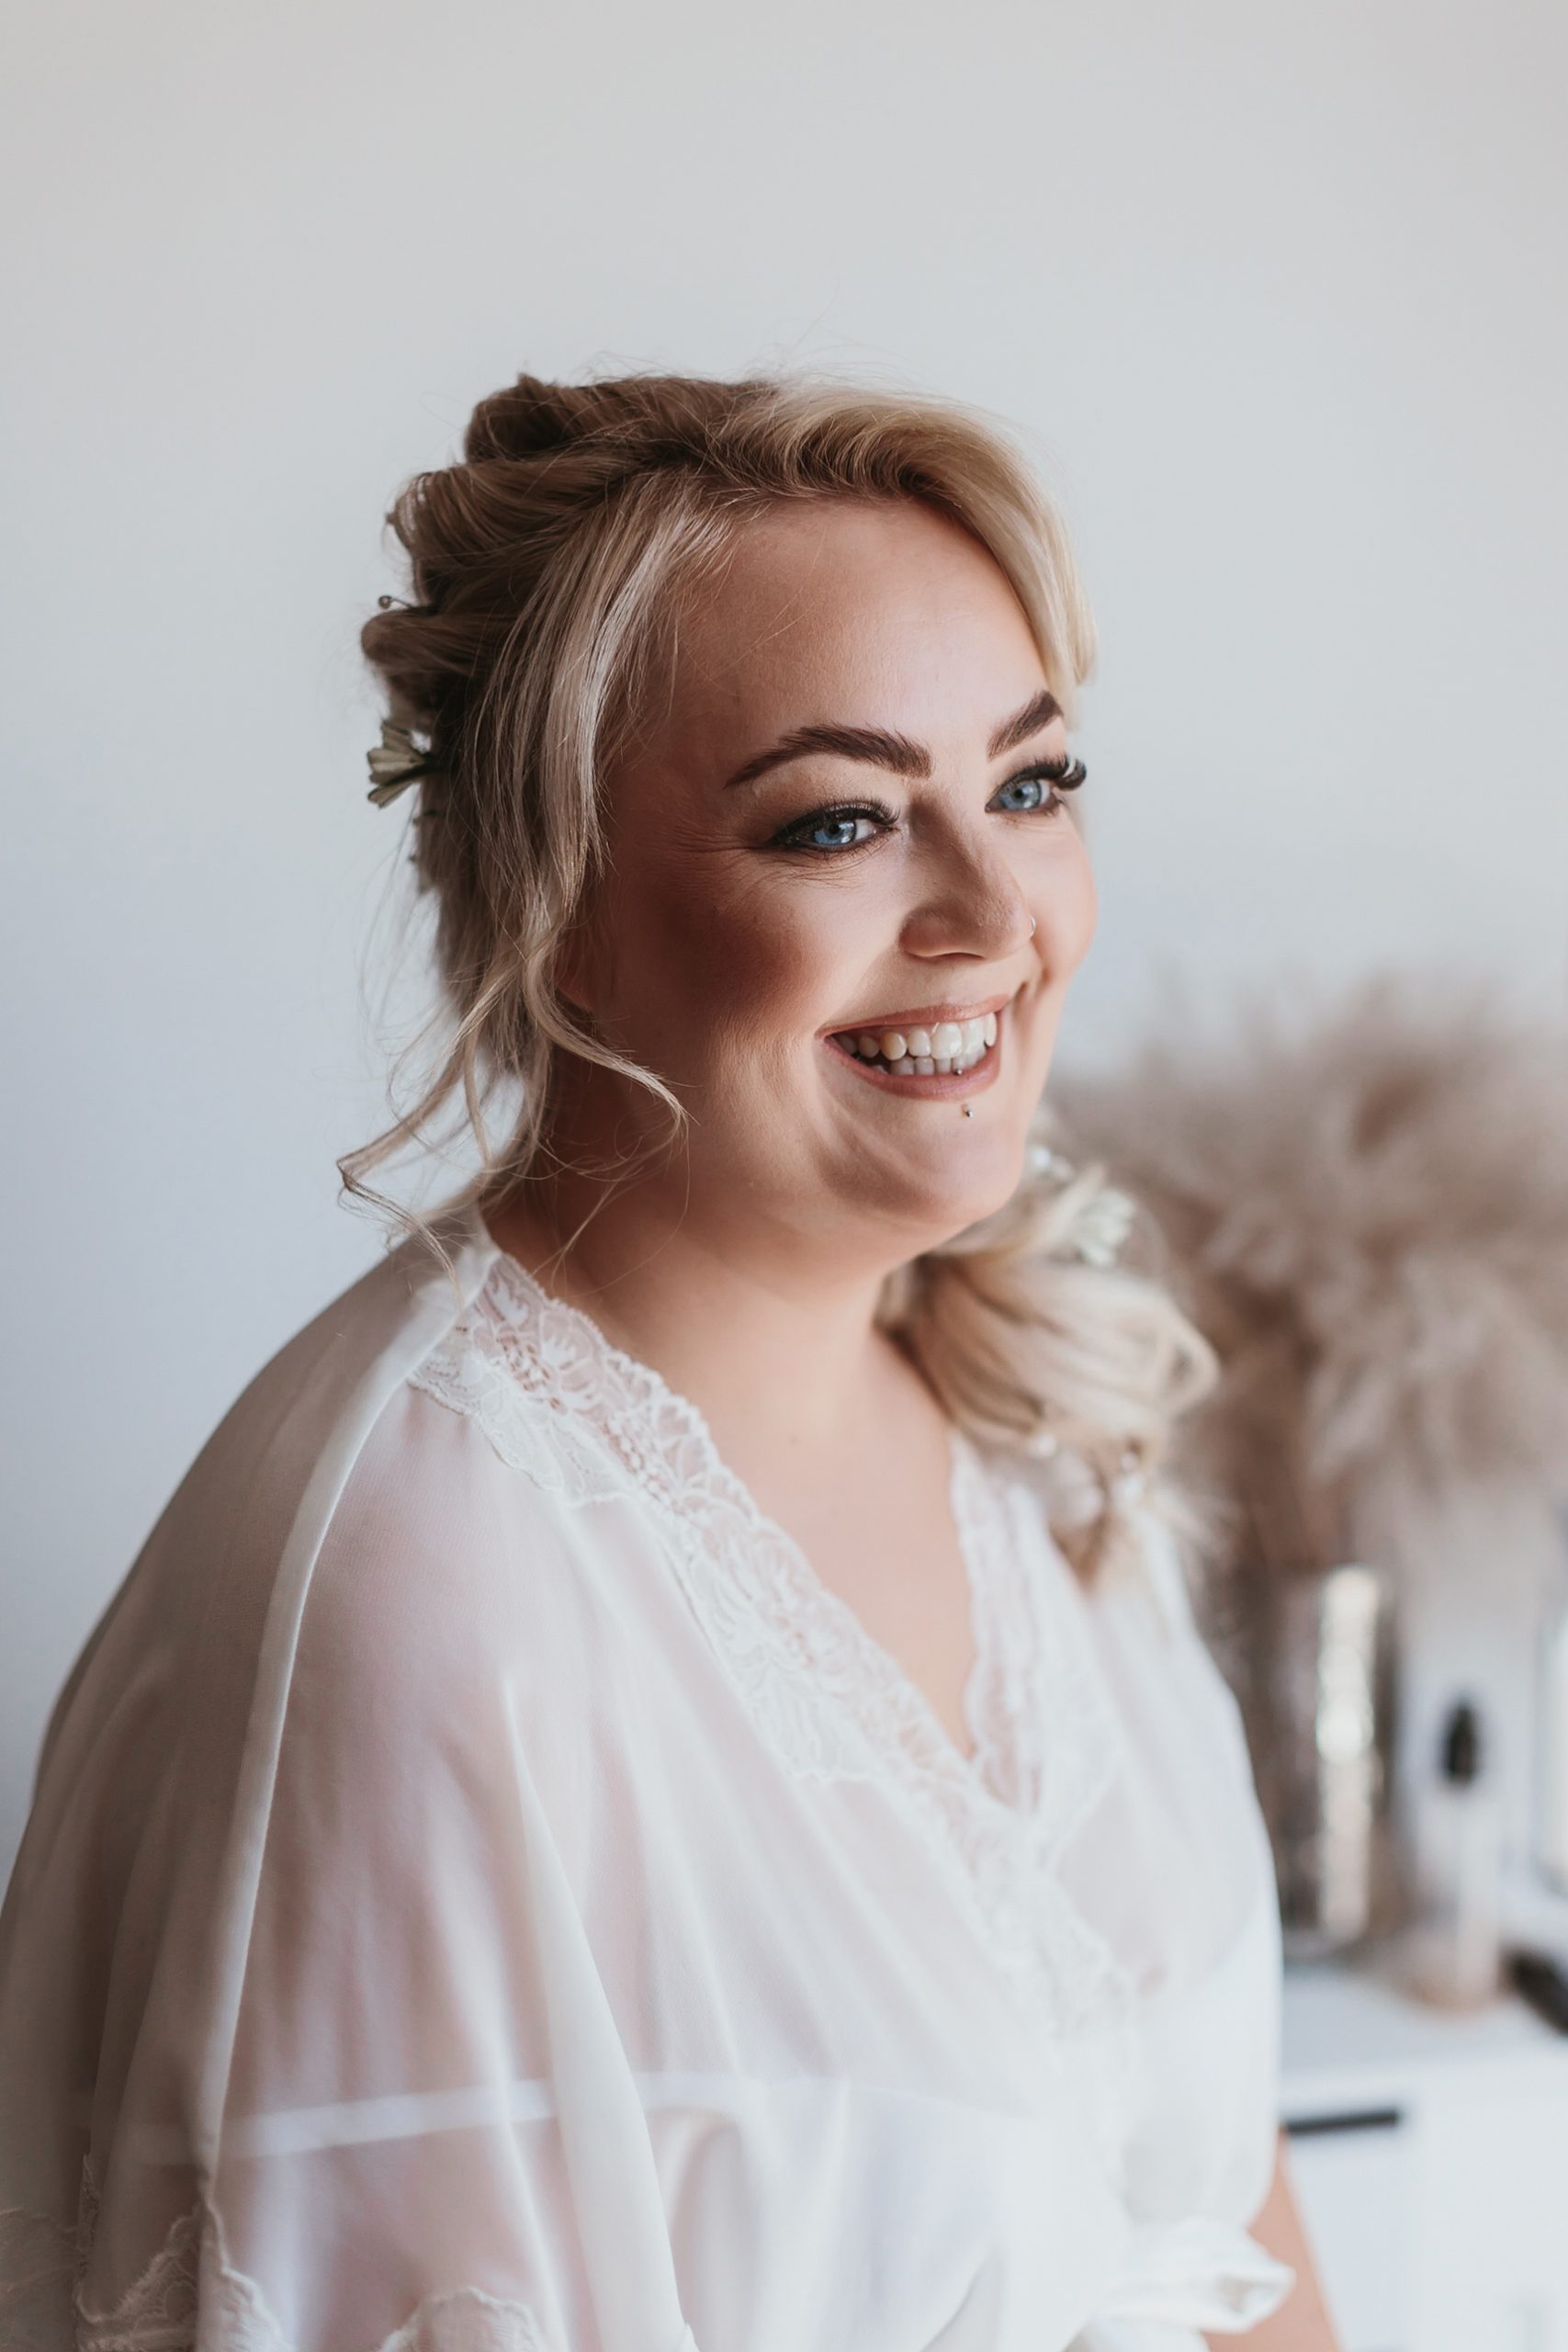 Very happy looking bride after having her make up done